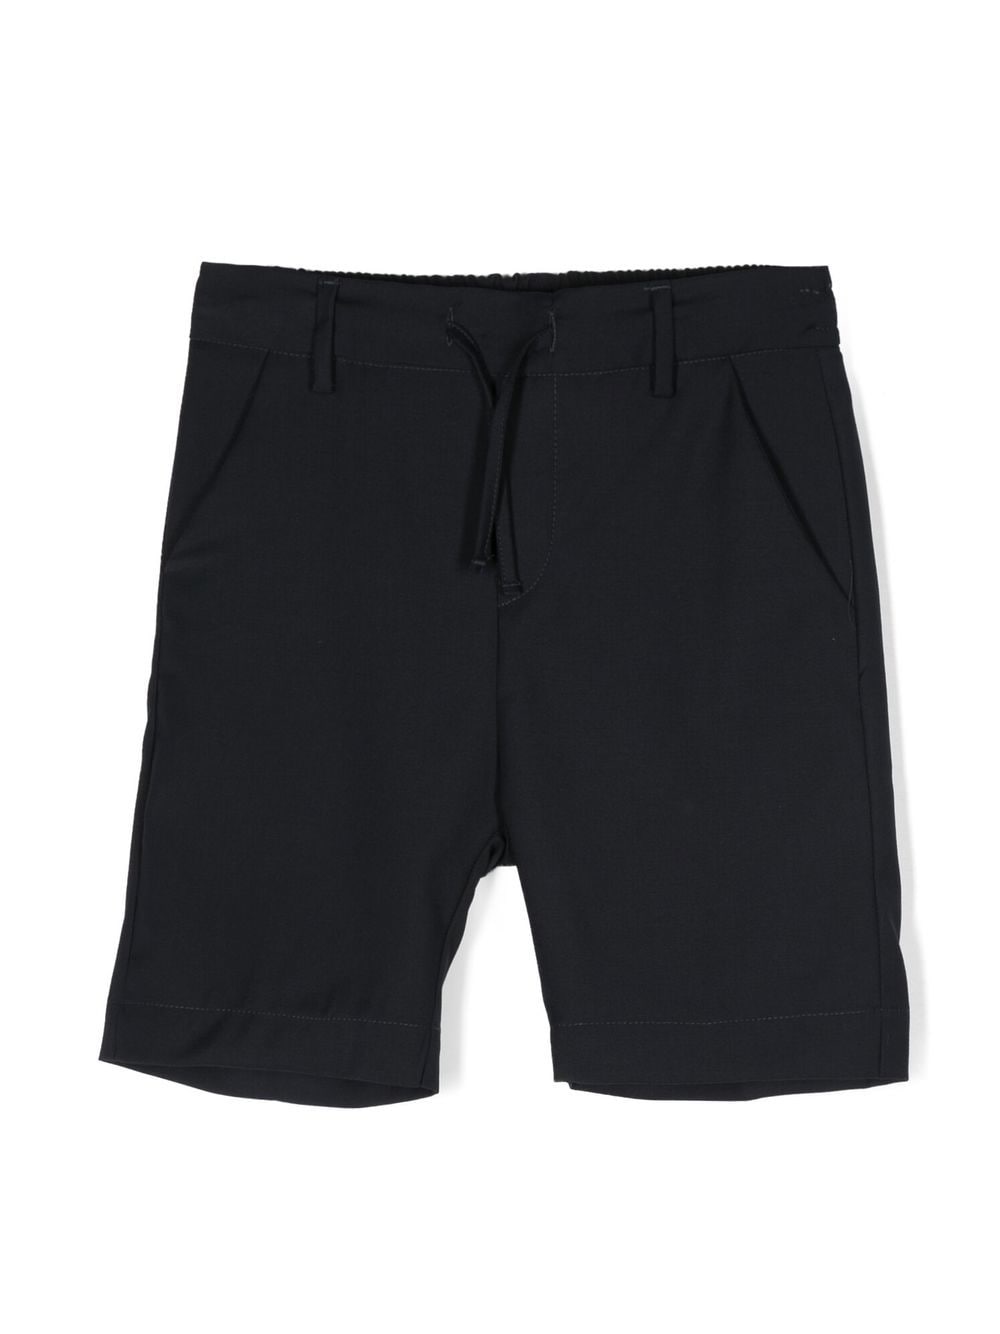 PAOLO PECORA SOLID COLOUR DRAWSTRING-FASTENING SHORTS